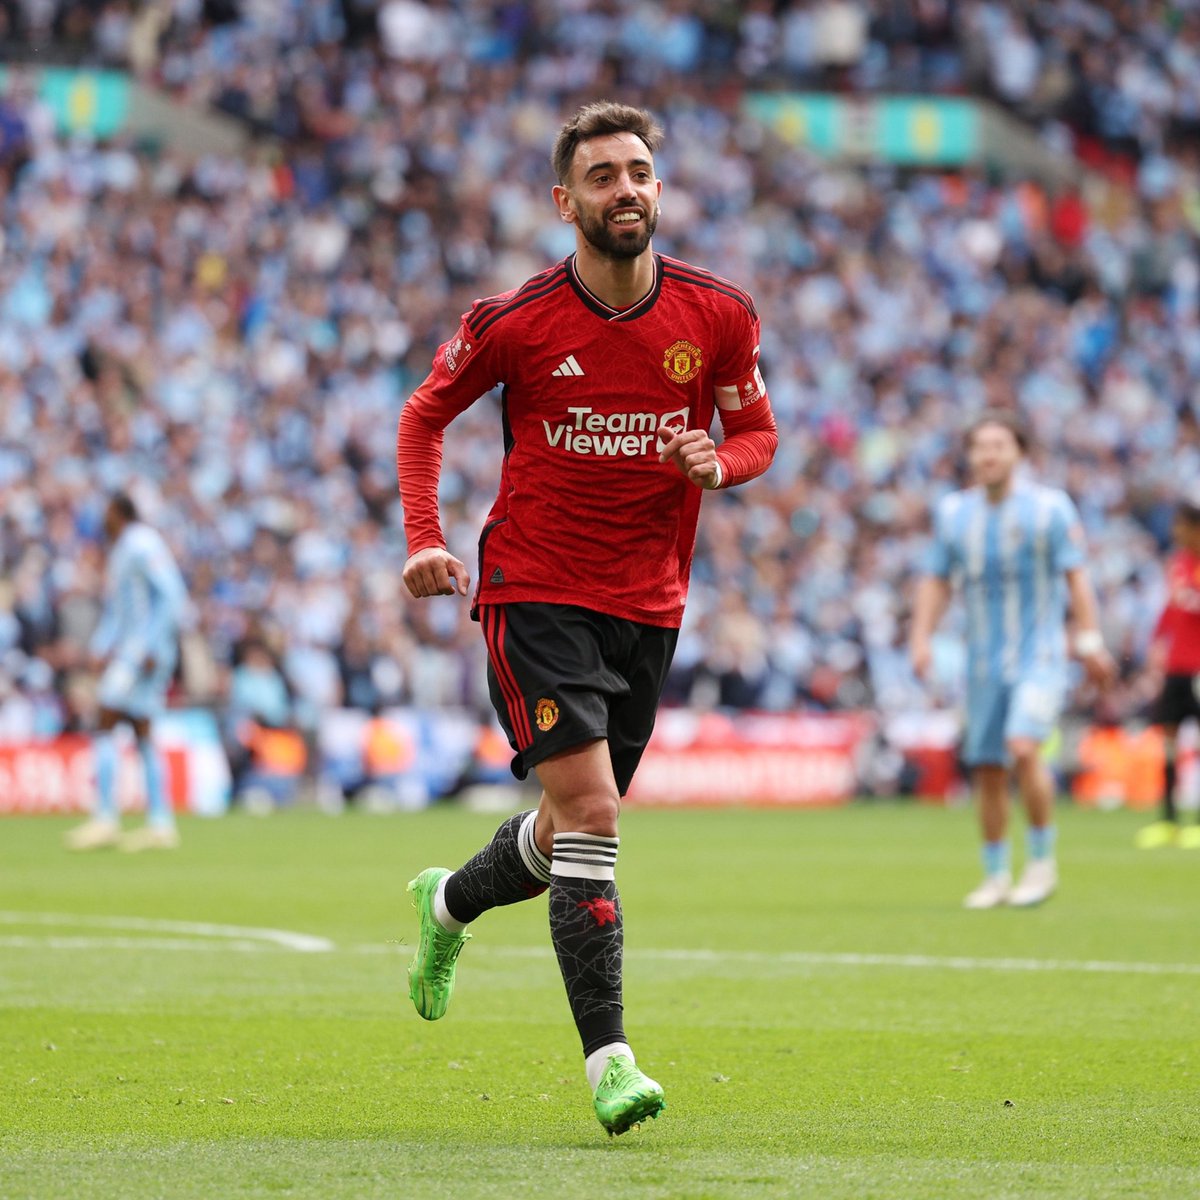 Bruno Fernandes for Manchester United so far this season:

— 13 goals
— 10 assists

Portuguese Magnifico 🪄🇵🇹